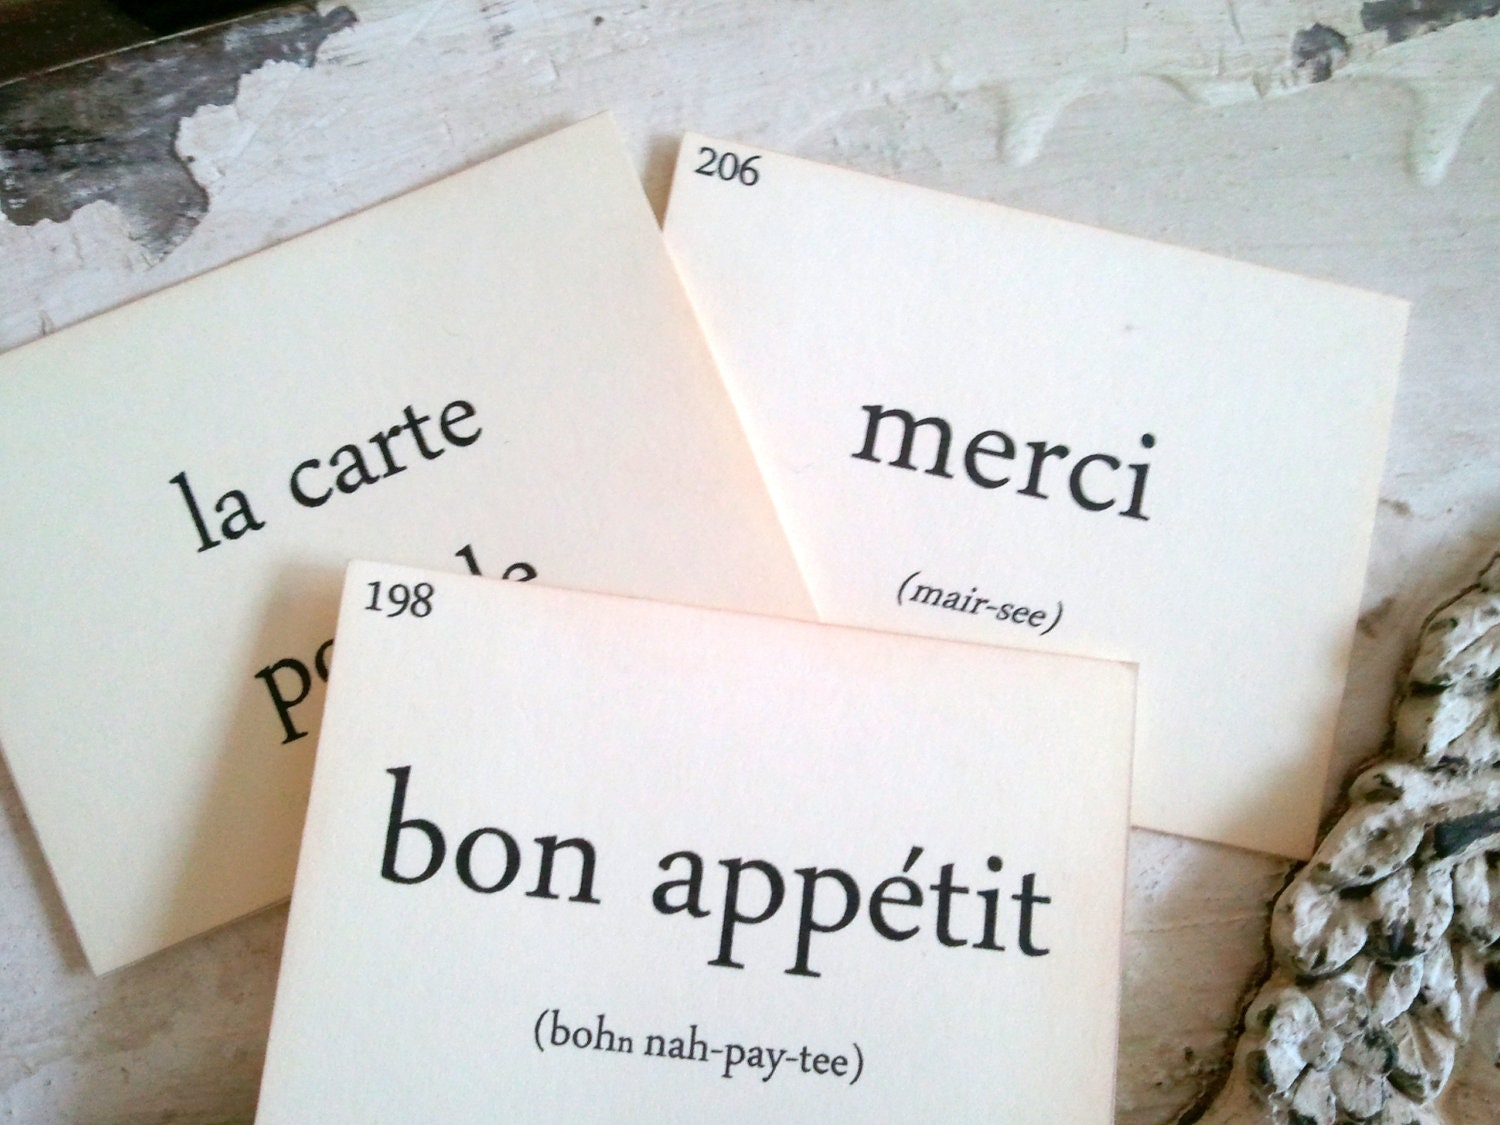 French Flashcards, French Words, French Home Decor, Scrapbooking, Small Embellishment, Set of 12 - 33PaperLane